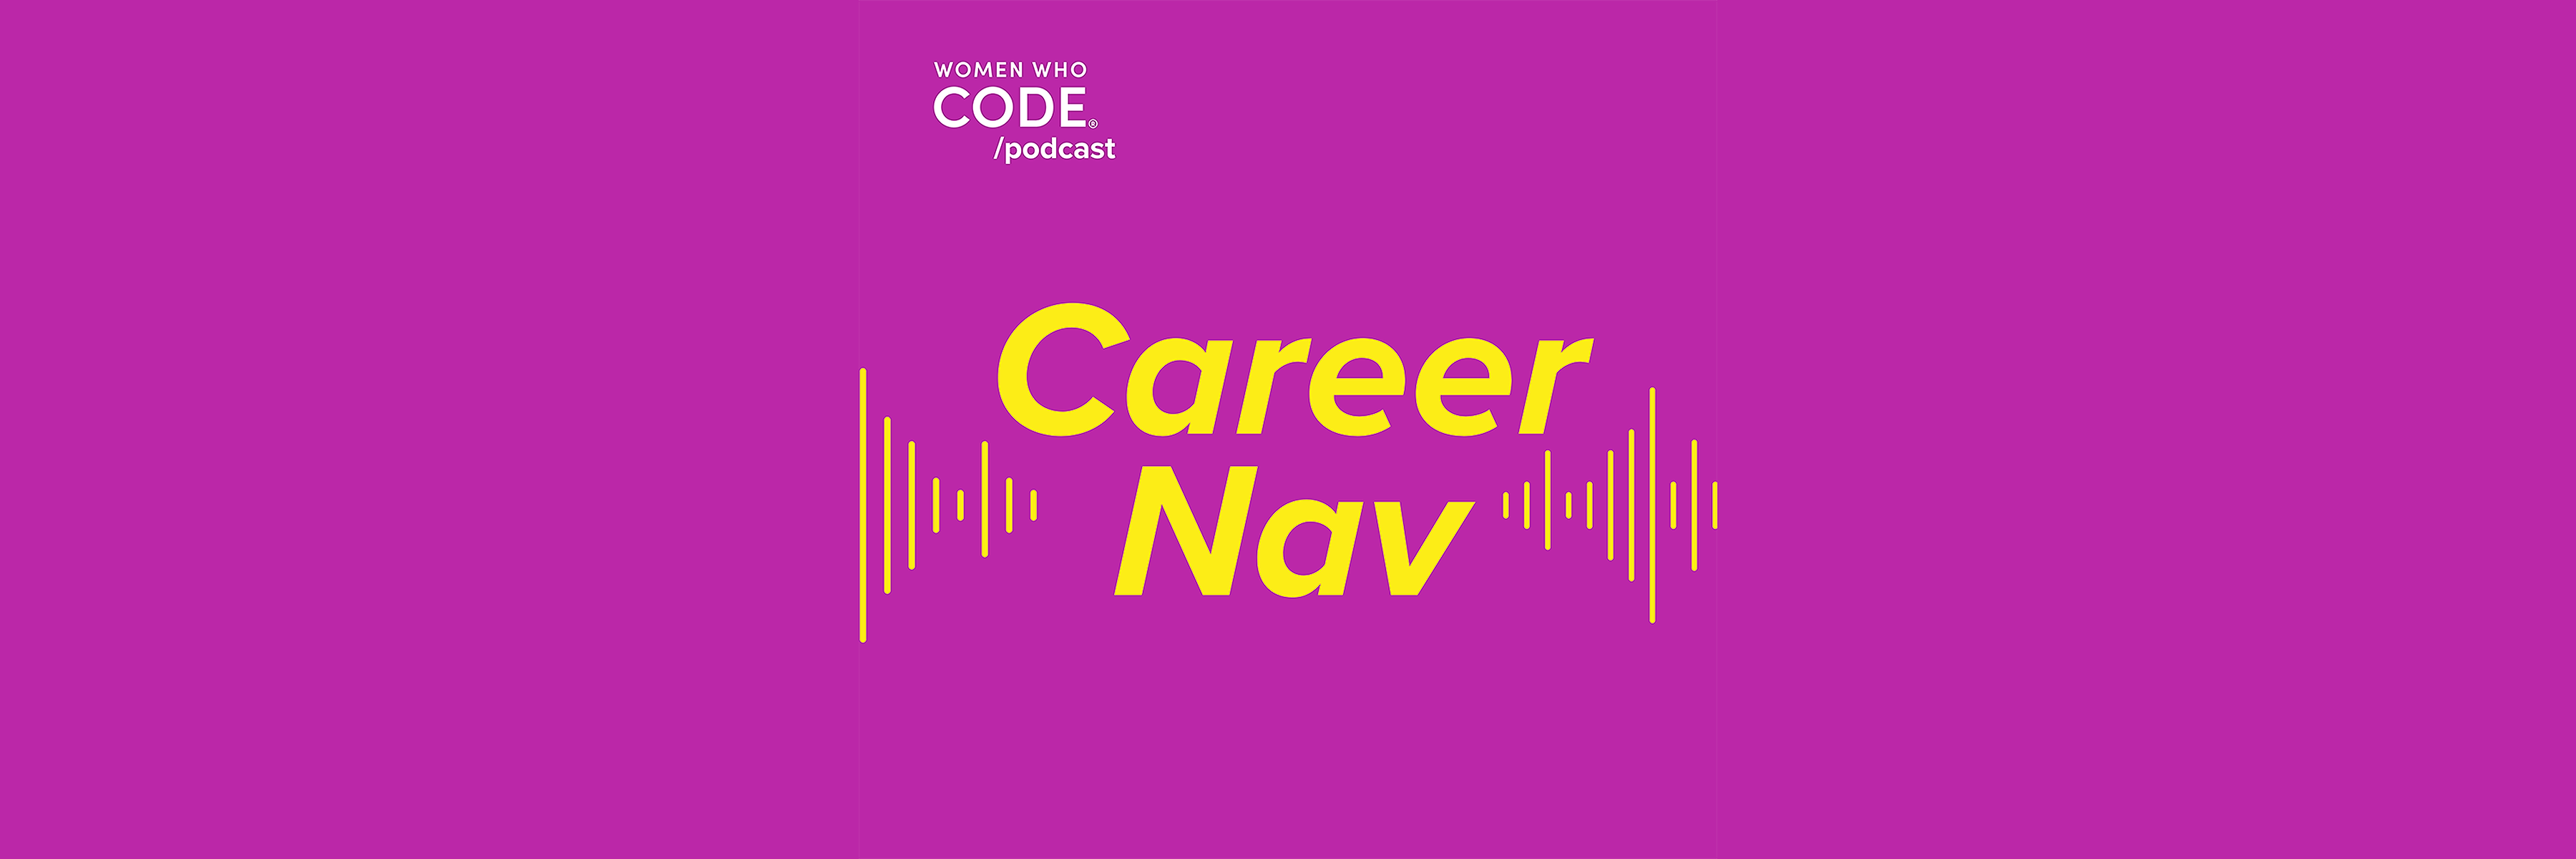 Career Nav #38: Tech Education for Software Engineers and Data Scientists